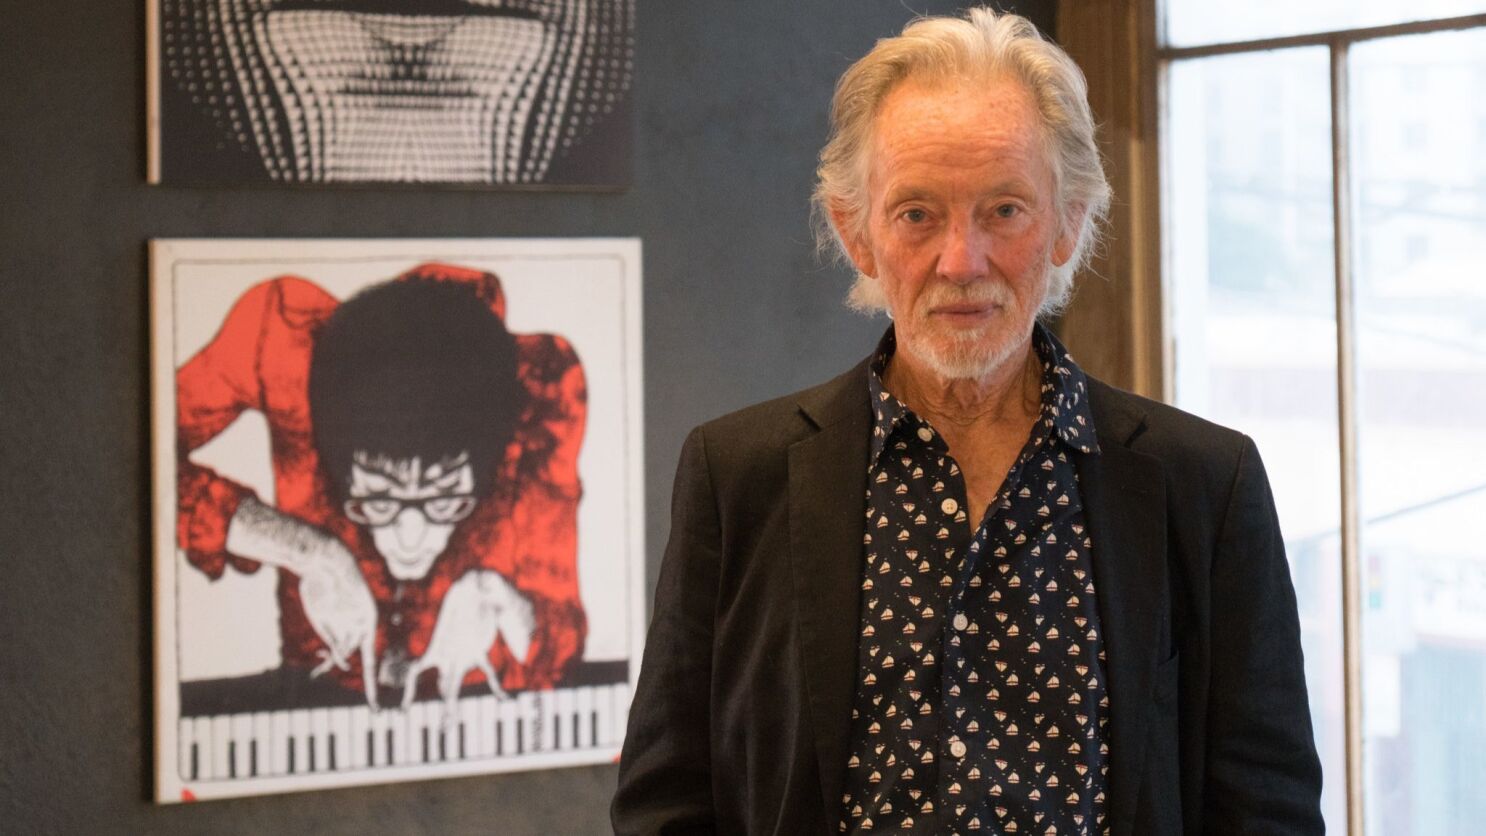 Beatles Revolver Album Cover Artist Klaus Voormann S Work Celebrated In 80th Birthday Exhibition In L A Los Angeles Times